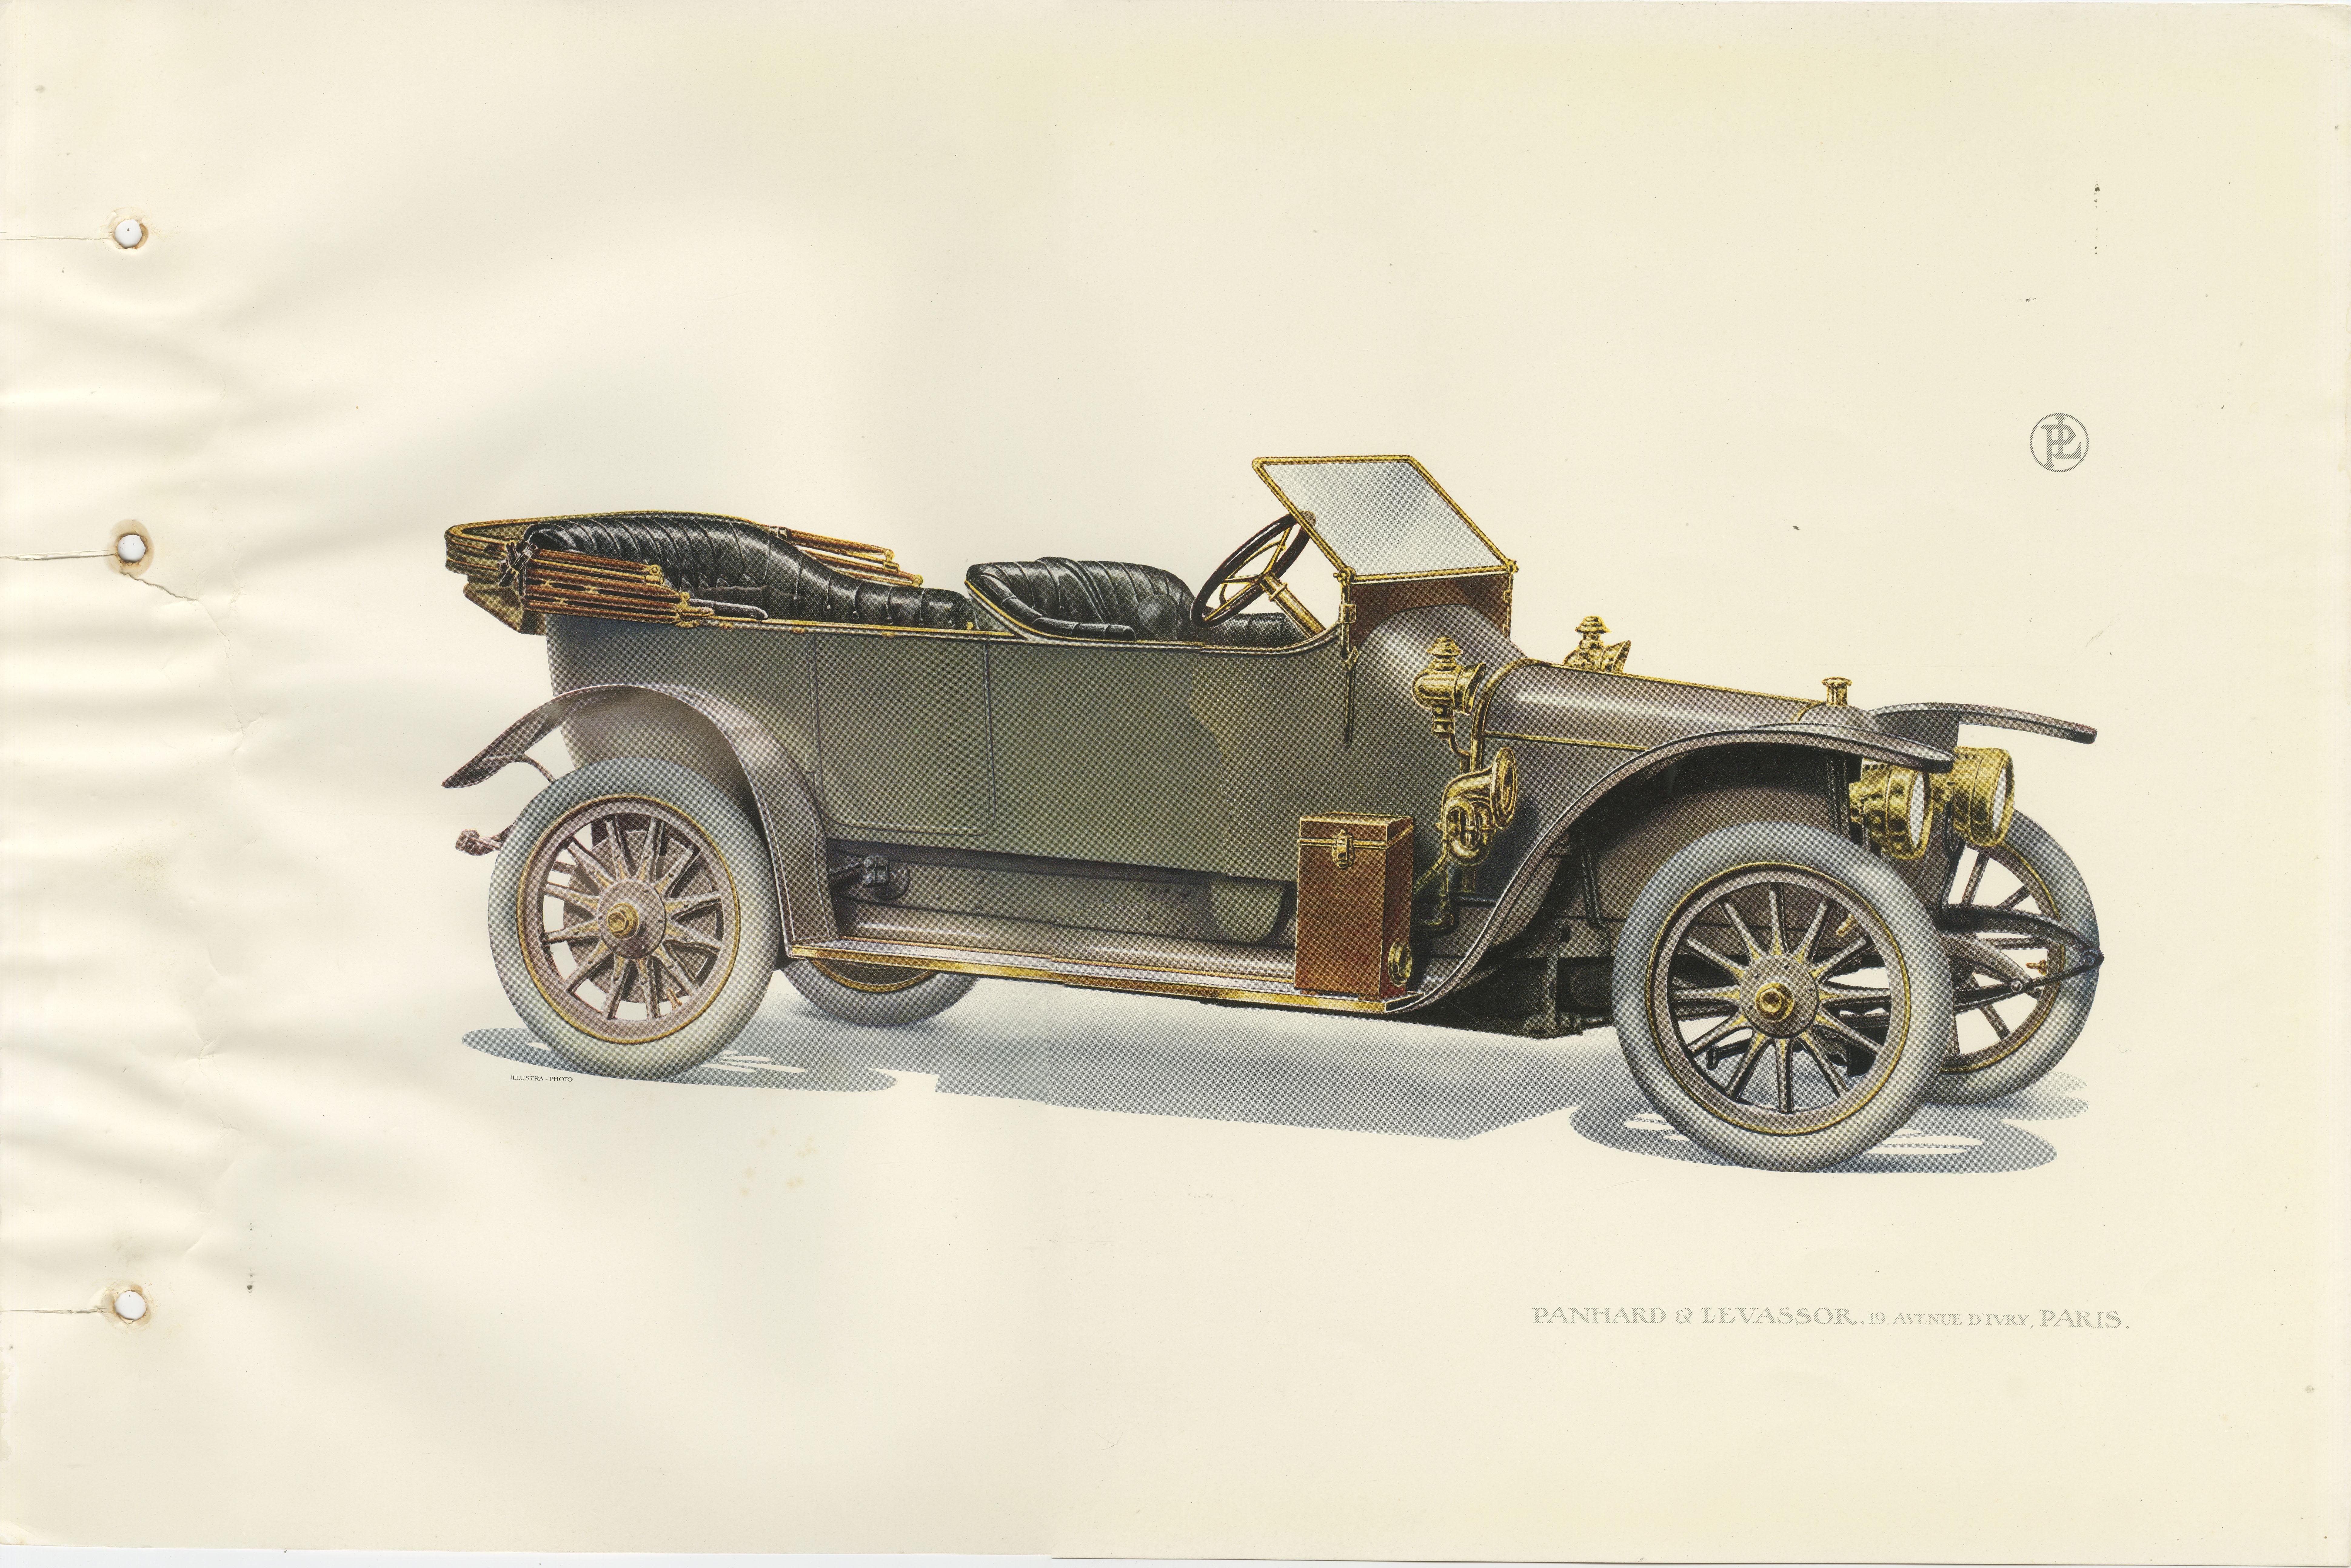 Antique print of a Panhard et Levassor torpedo car. This print originates from a rare catalog of the exclusive French brand Panhard & Levassor from 1914.

Panhard was a French motor vehicle manufacturer that began as one of the first makers of